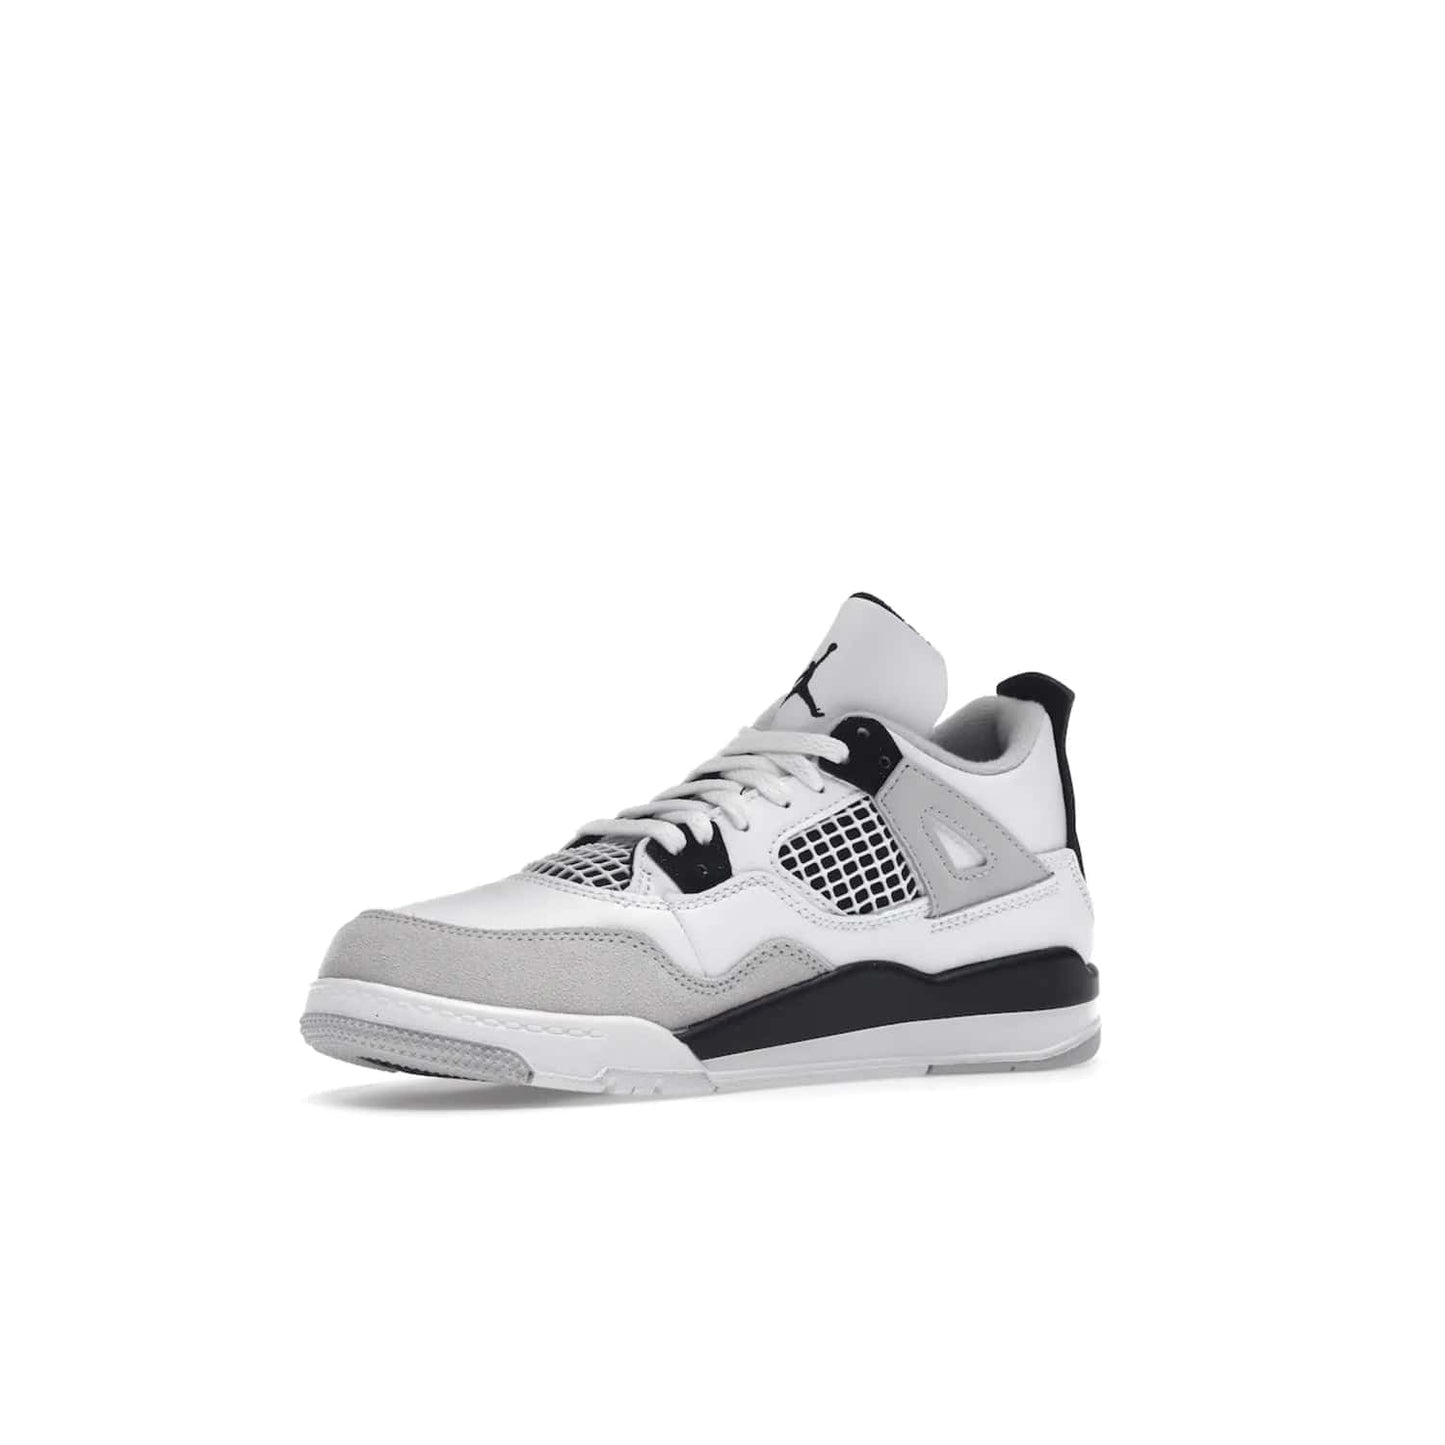 Jordan 4 Retro Military Black (PS) - Image 16 - Only at www.BallersClubKickz.com - Iconic Air Jordan 4 Retro Military Black PS with classic White, Black and Neutral Grey color palette. Mesh panels, adjustable lacing and rubber outsole. Releasing on 21st May 2022 - must-have for any sneaker collection.